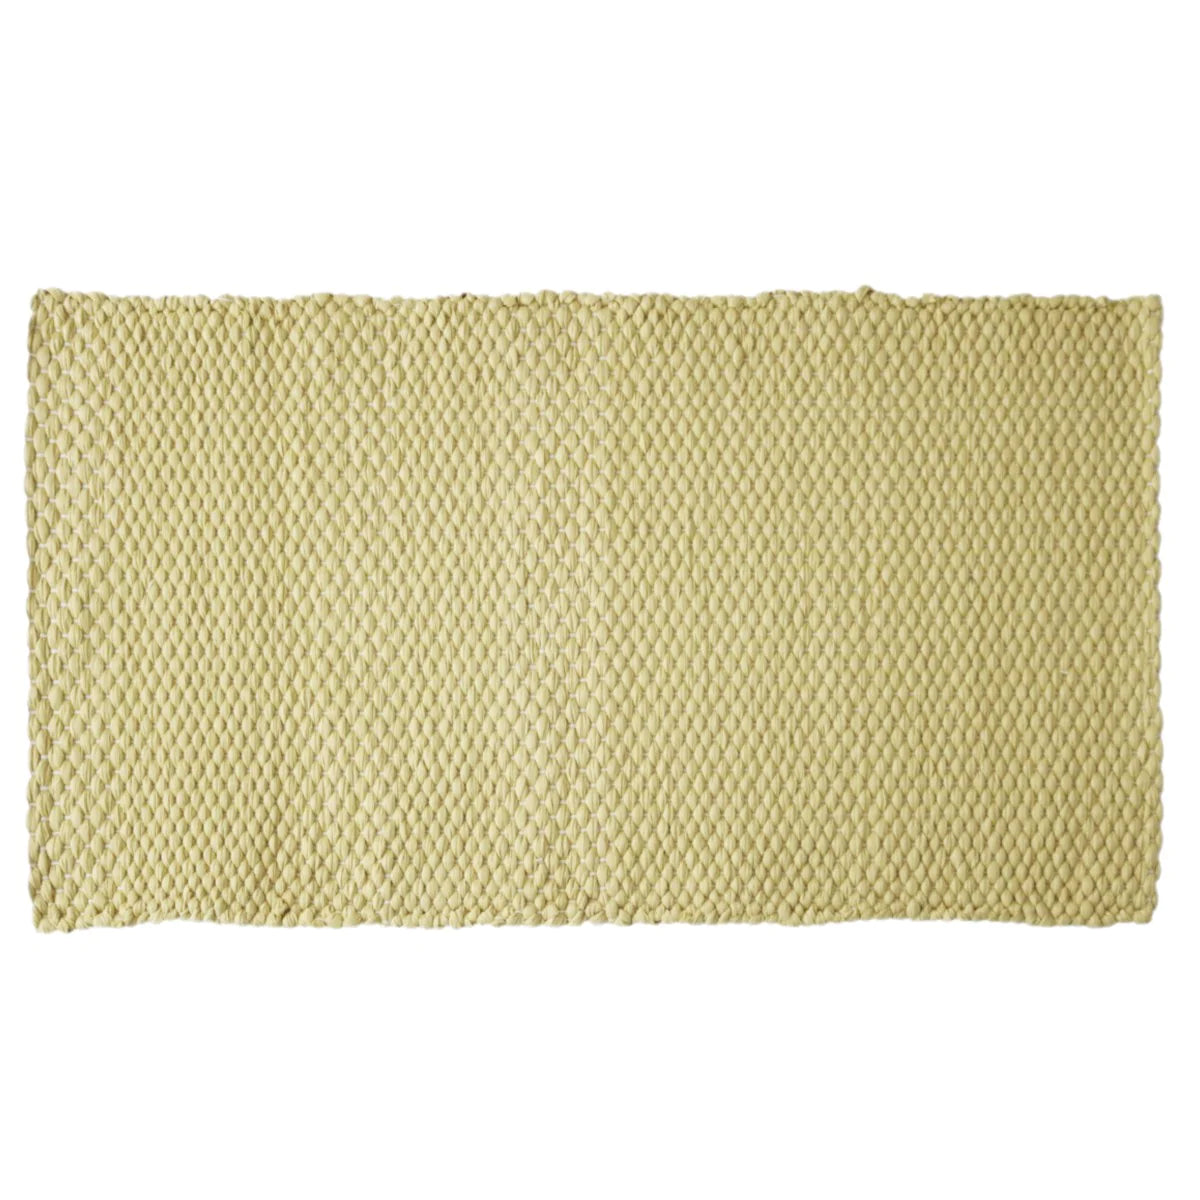 Deocriste Sustainable Rug Handwoven From Upcycled Fibers in Yellow